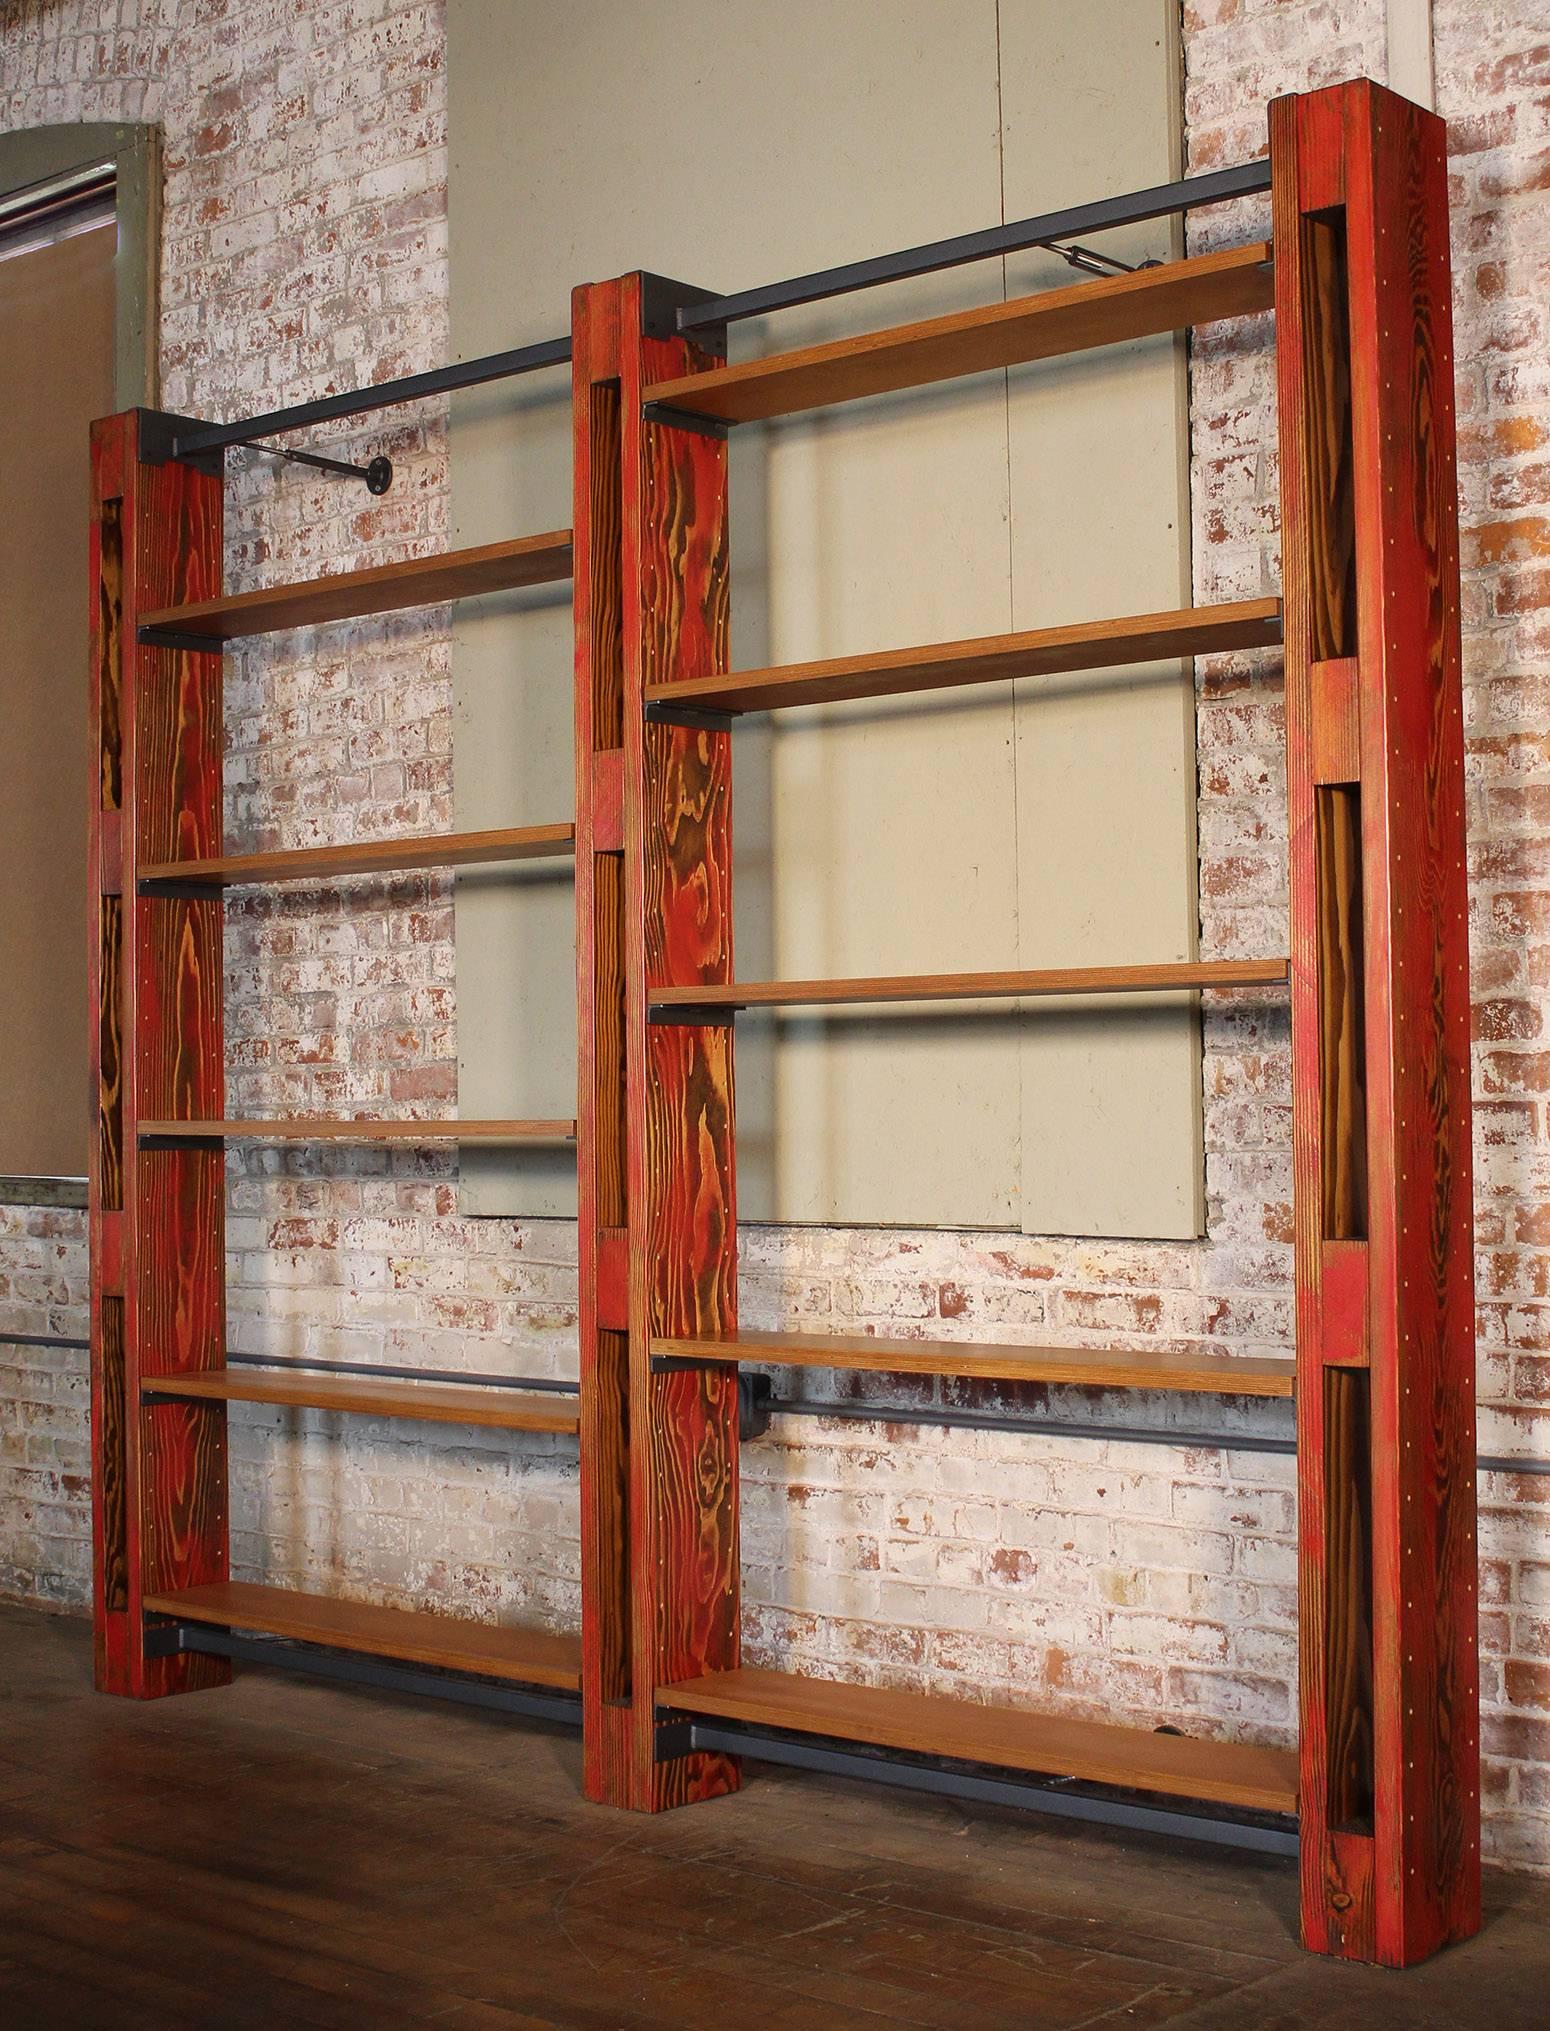 Custom modular shelving storage bookcase system by Get Back Inc. In the vintage Industrial style. System as shown includes ten 8″ shelves, three beams, two top mounting bars, two bottom mounting bars, six adjustable wall mounting brackets, and ten